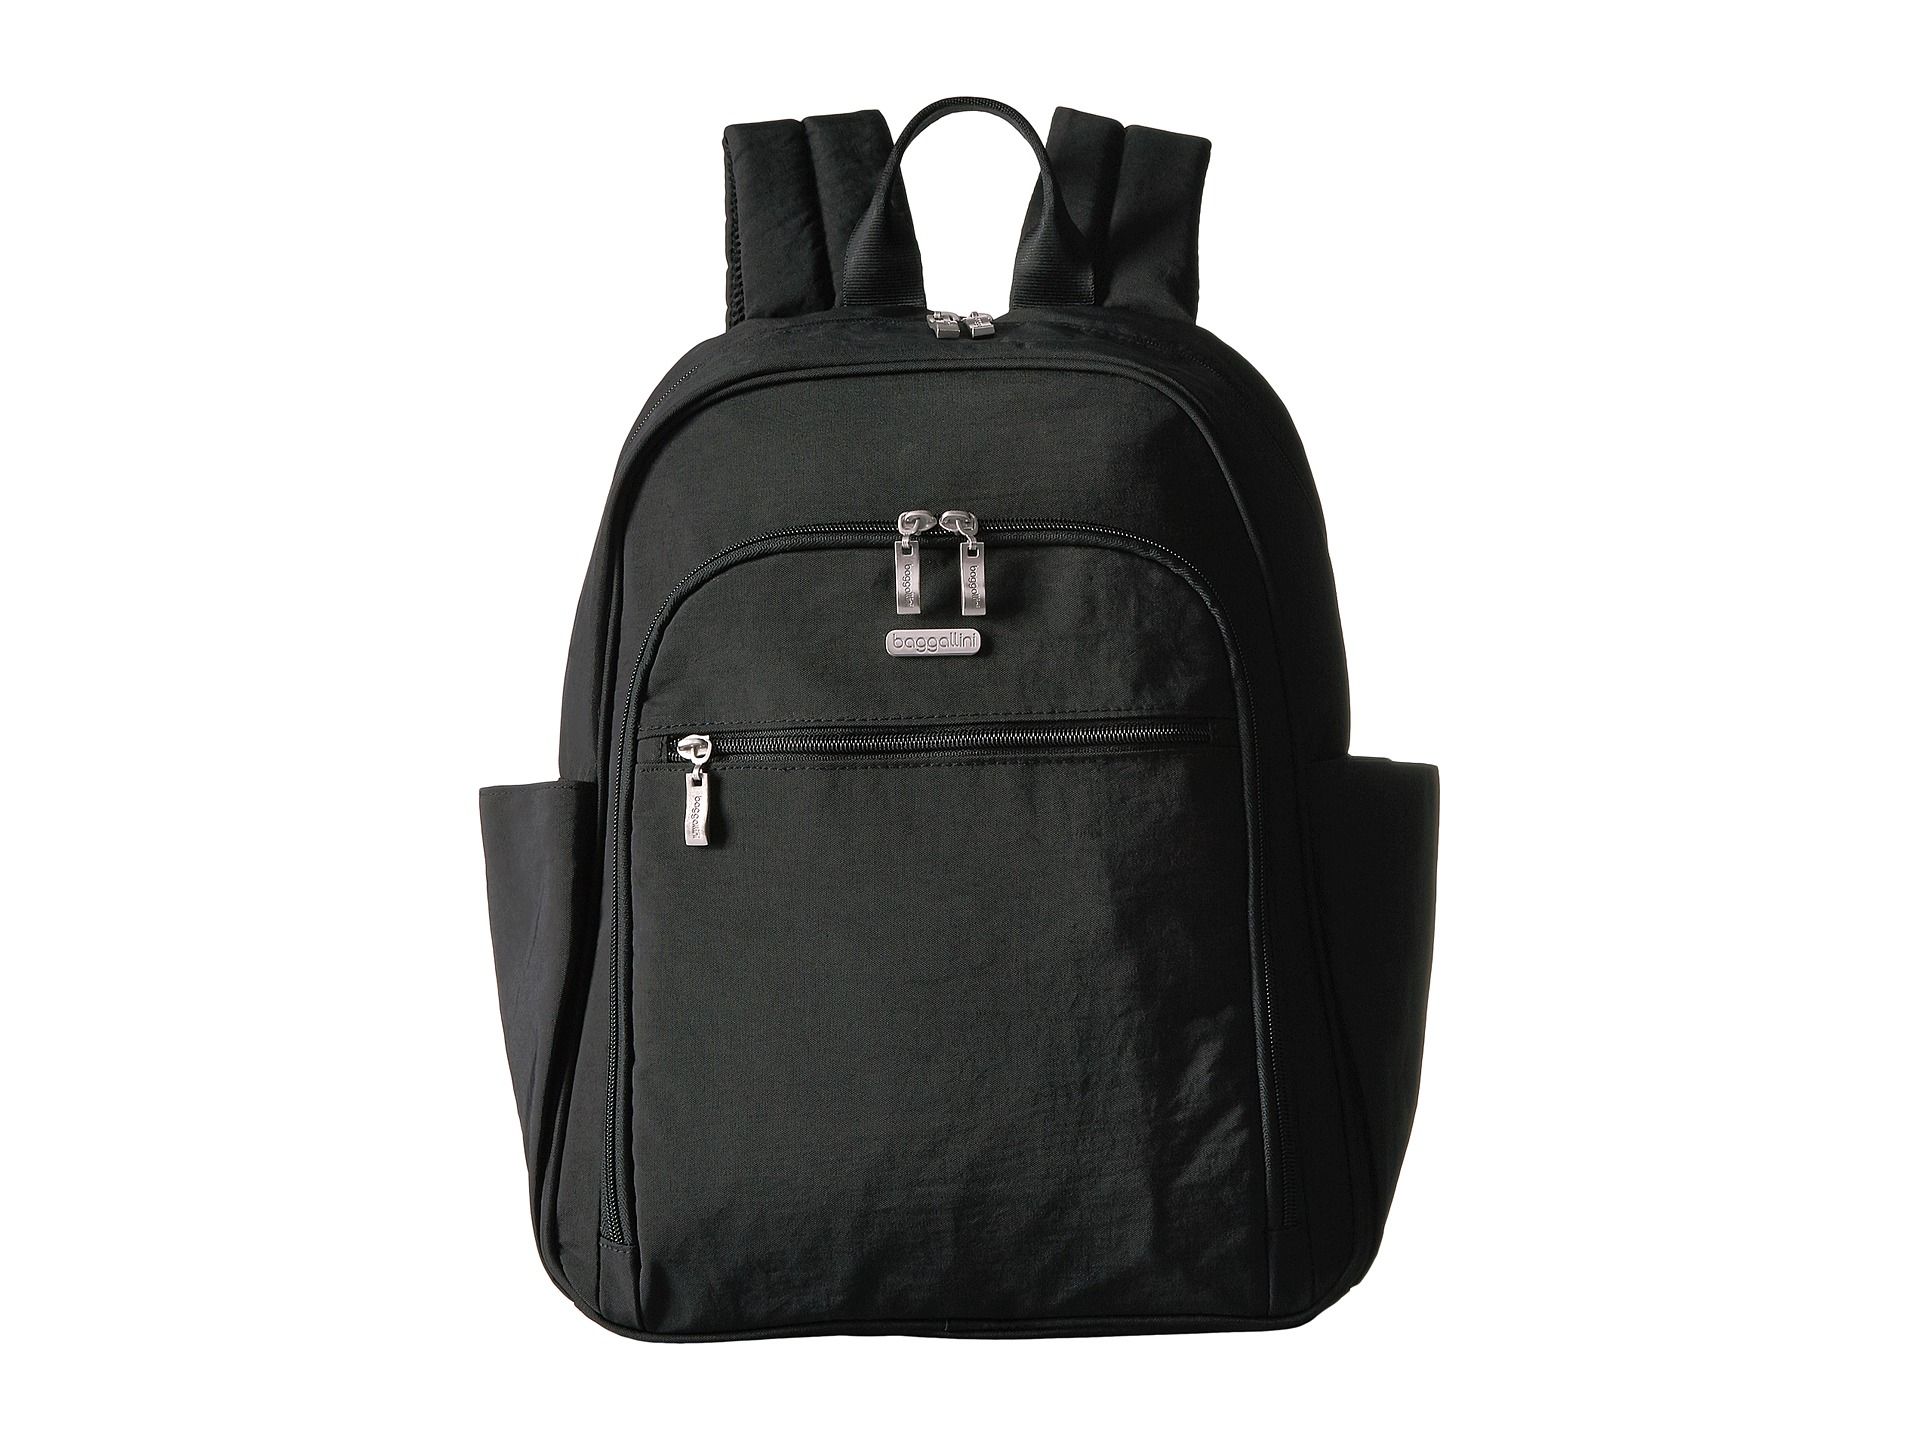 Baggallini Essential Laptop Backpack with RFID | Zappos